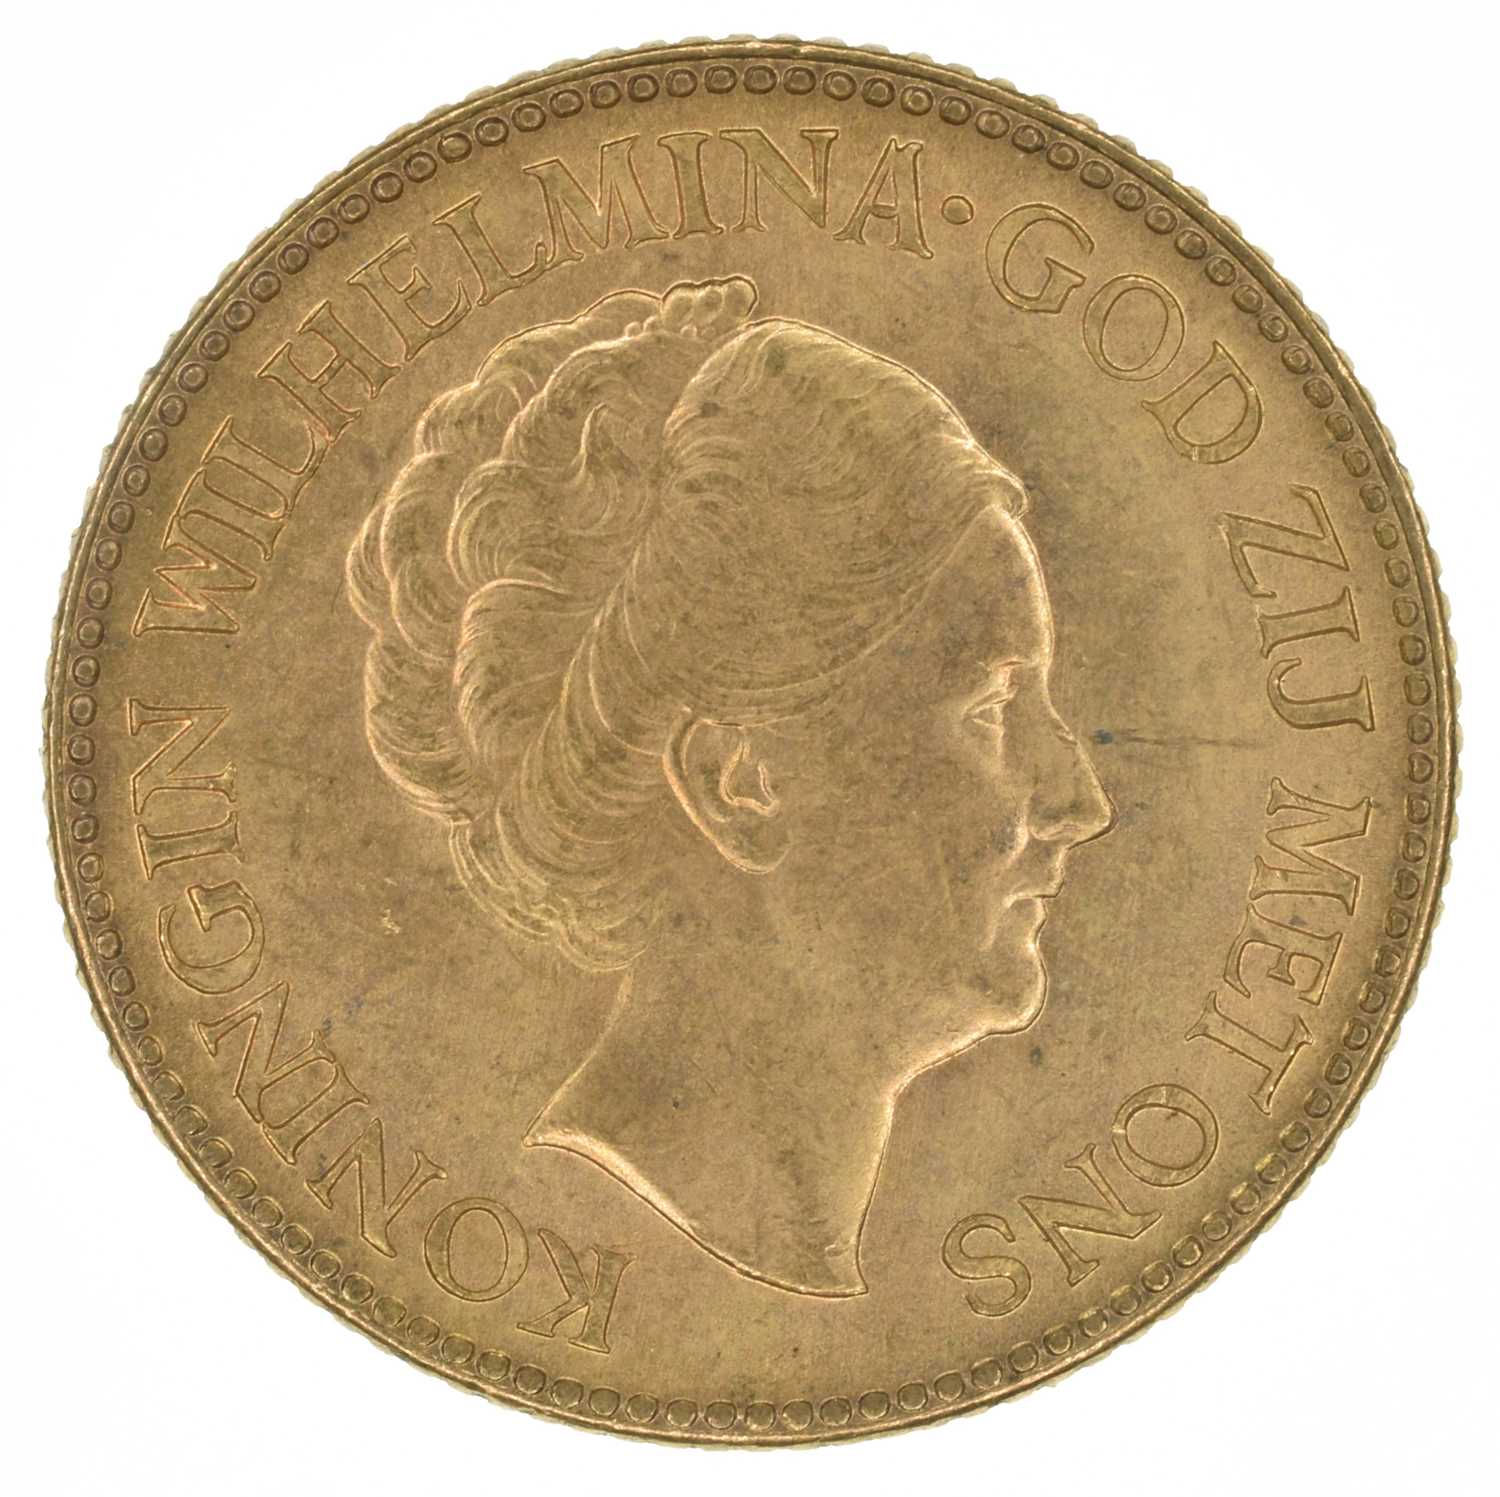 Lot 84 - Netherlands, 10 Guilders, 1926, gold coin.